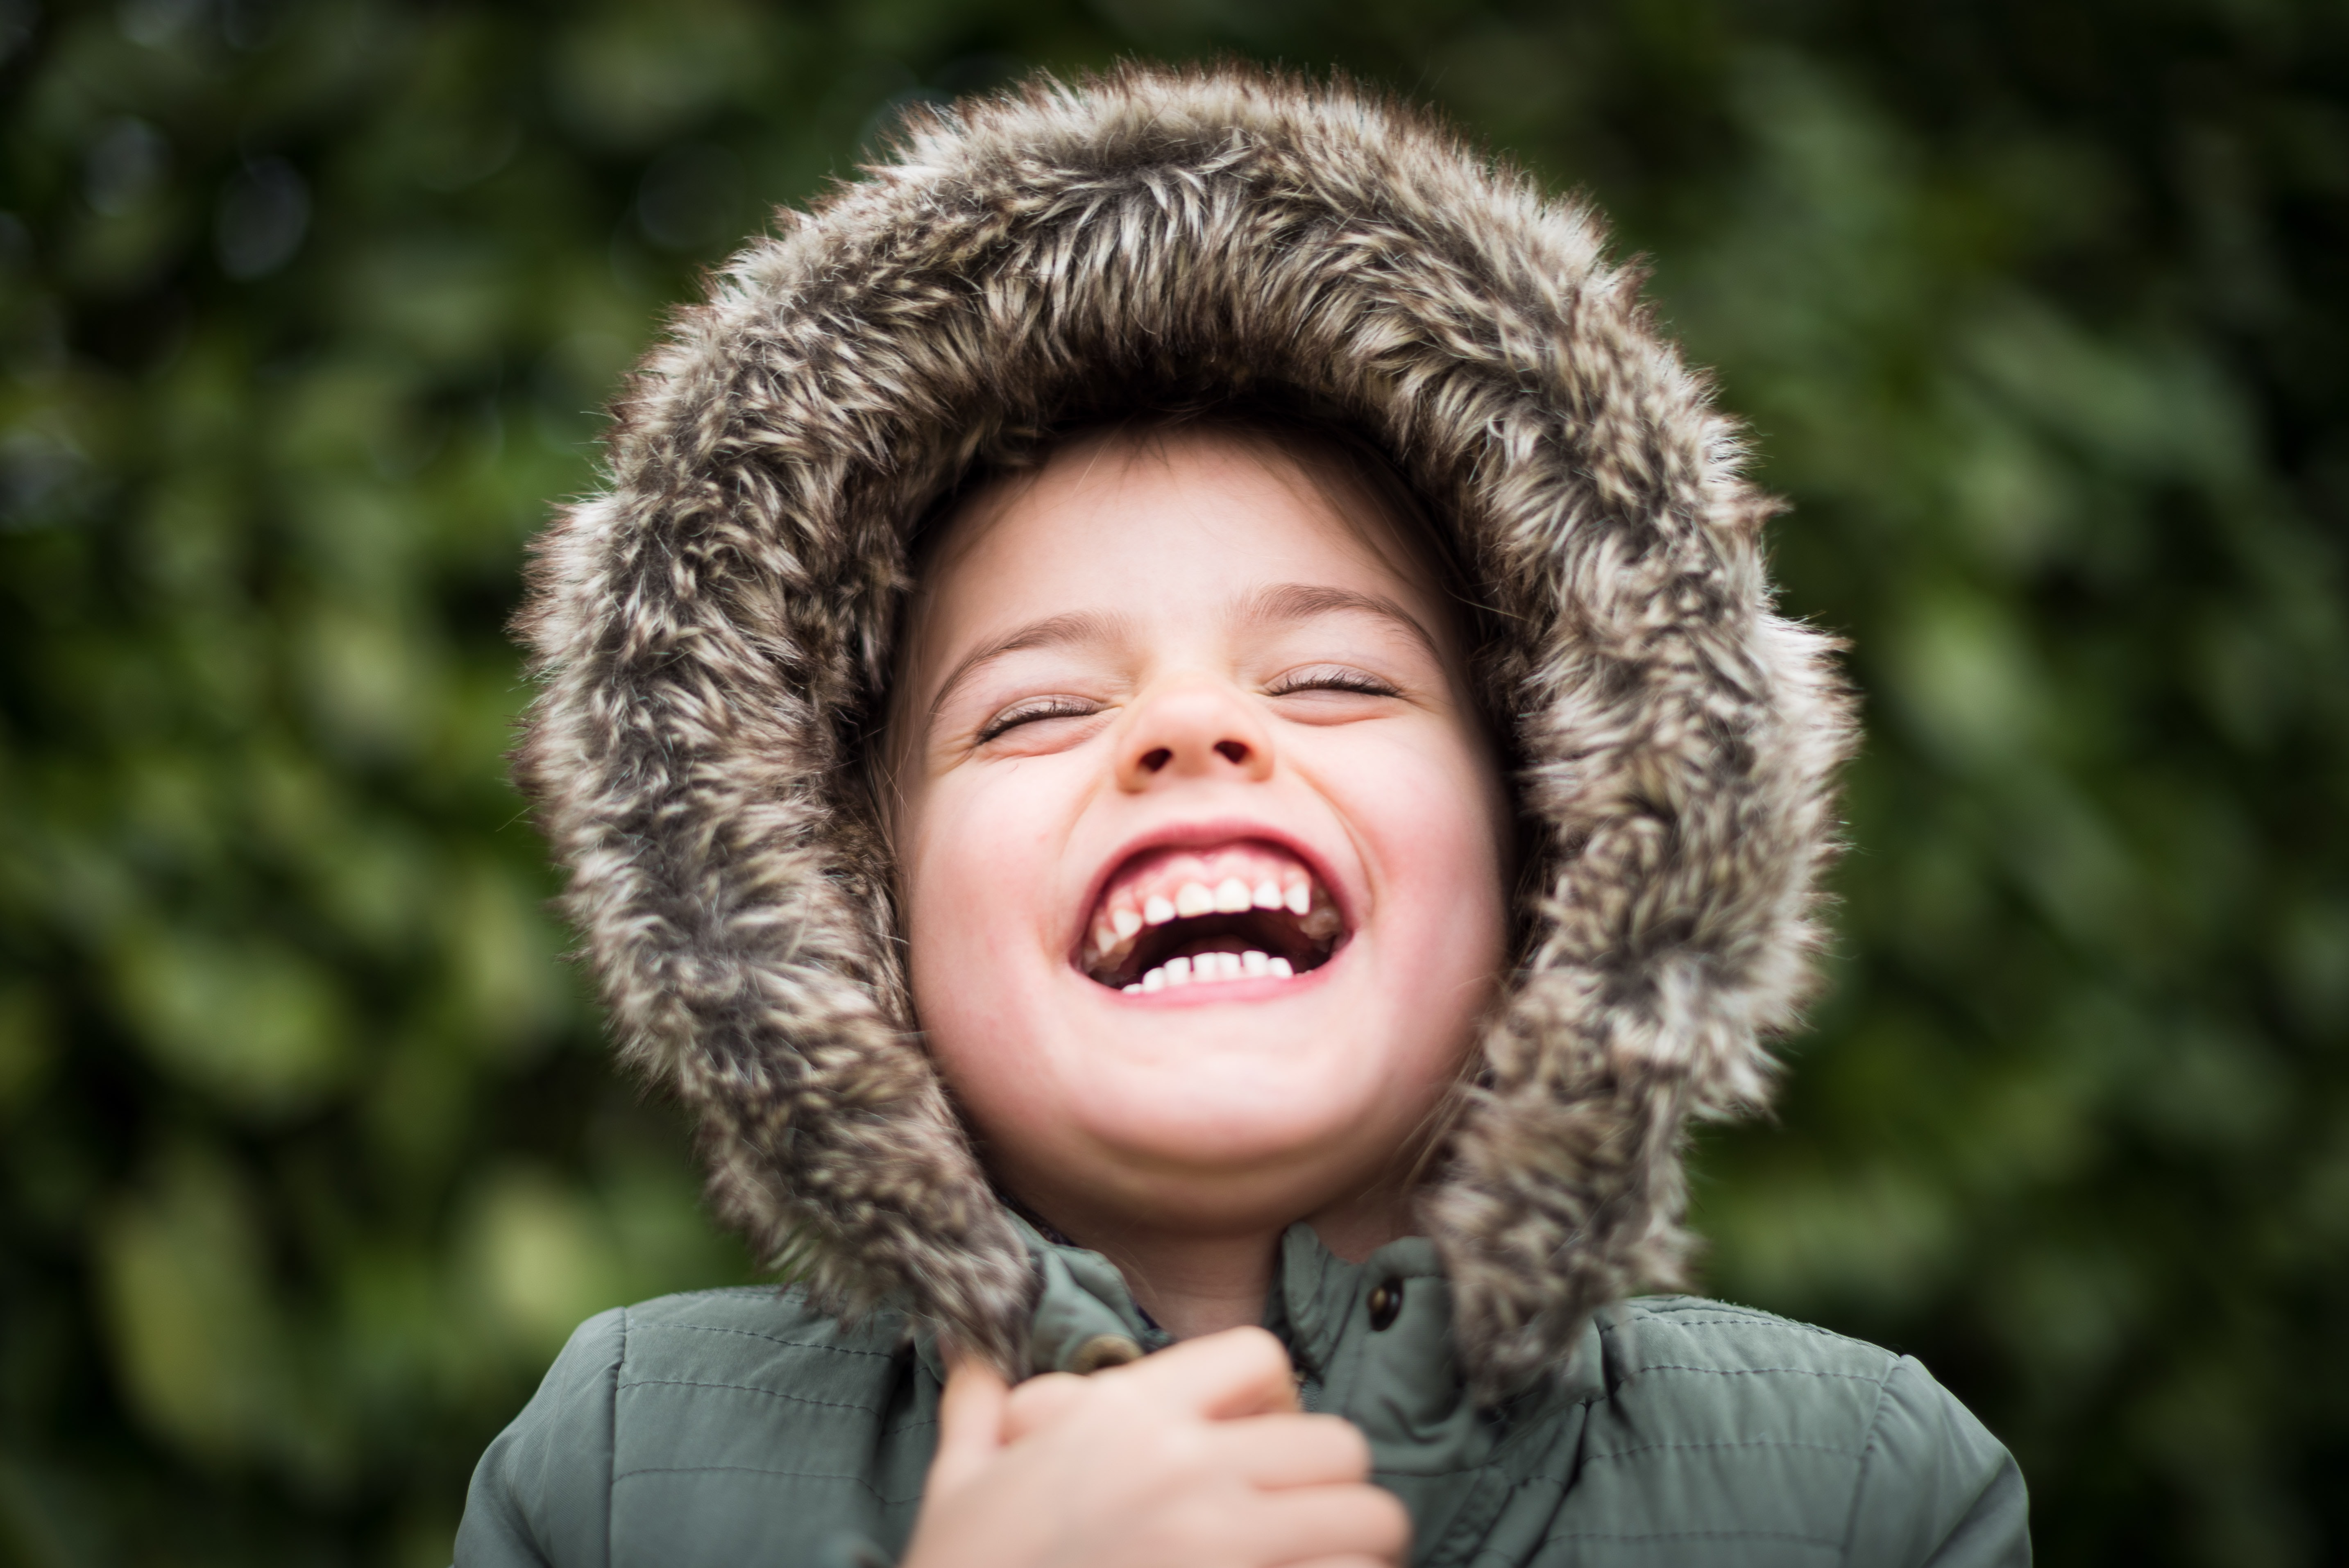 Churchich Recreation Benefits of Playing Outside Kid in Winter Coat Laughing